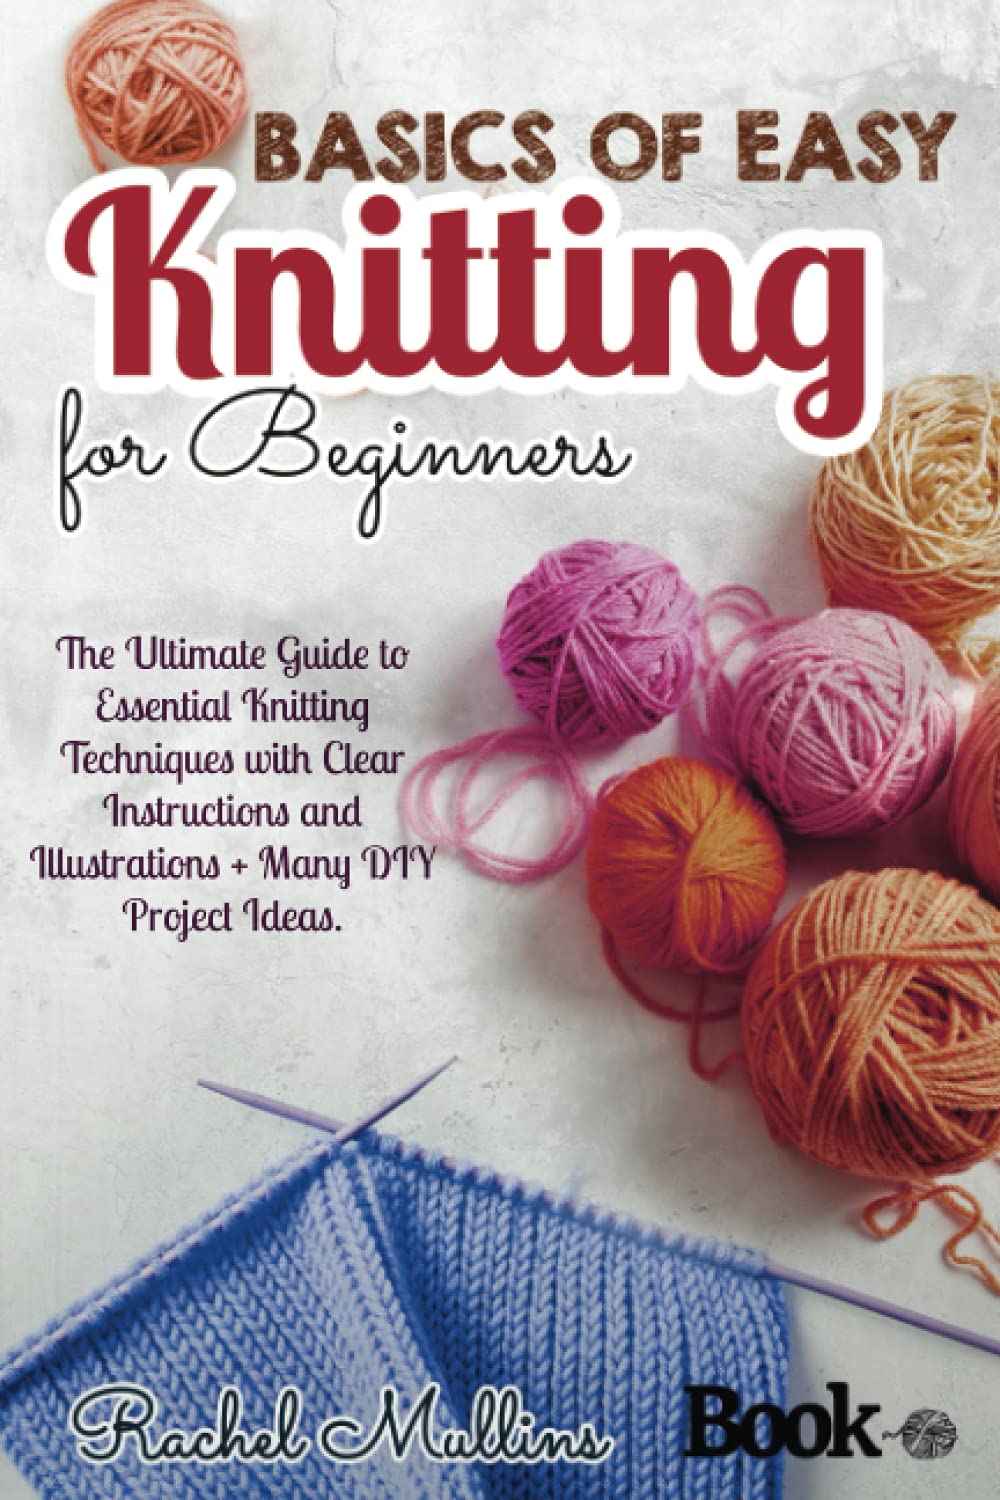 Basics of easy knitting for beginners: The Ultimate Guide to Essential Knitting Techniques with Clear Instructions and Illustrations + Many DIY Project Ideas.